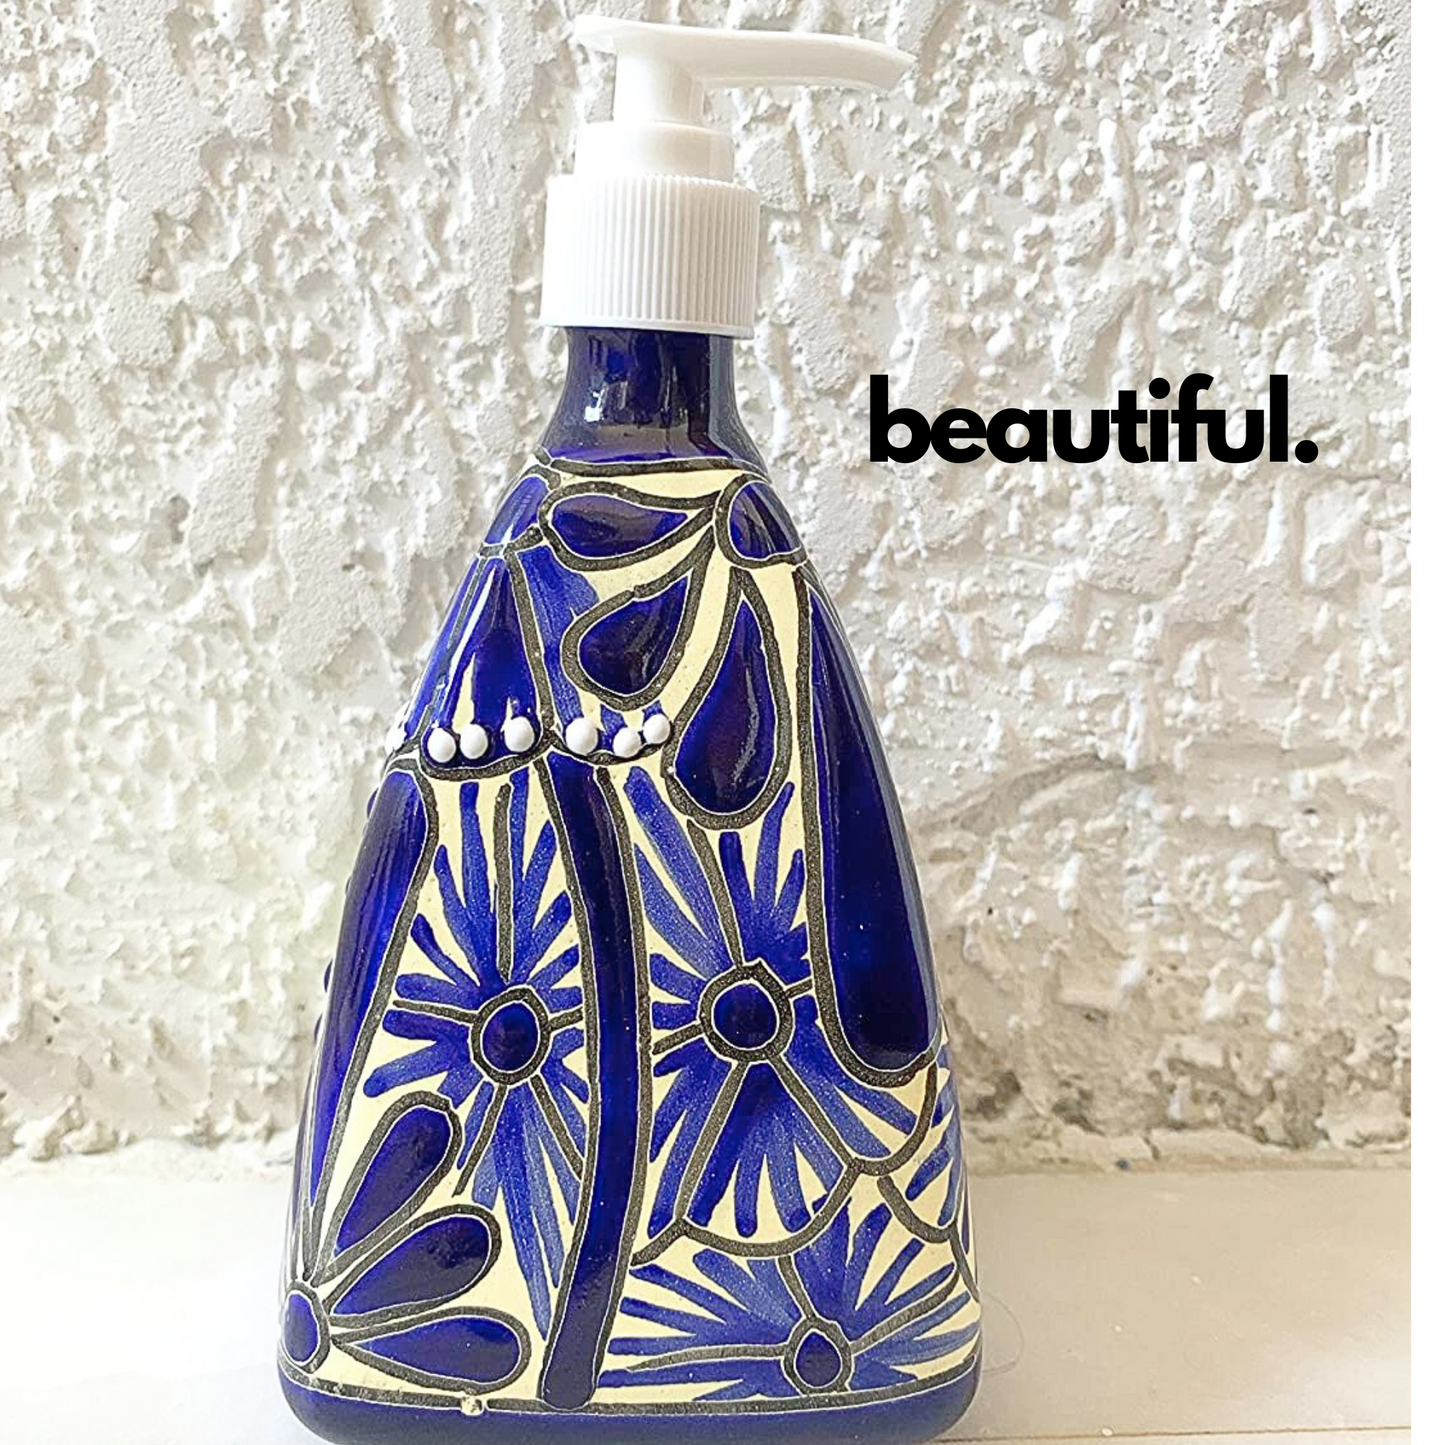 beautiful An eye-catching, hand-painted, Refillable Ceramic Soap Dispenser, skillfully crafted in Mexico. Perfect for adding a vibrant touch to any kitchen or bathroom.